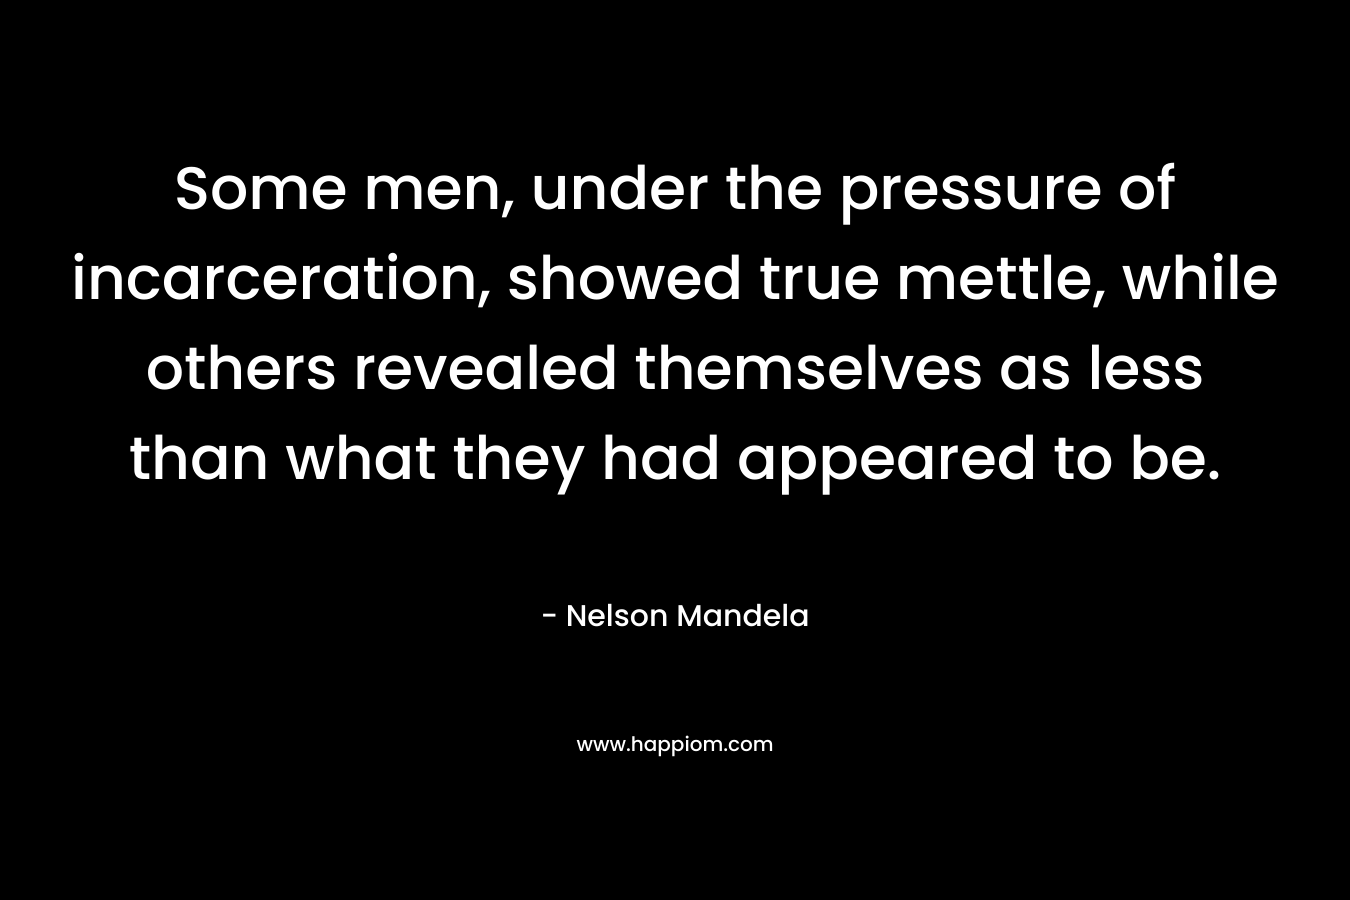 Some men, under the pressure of incarceration, showed true mettle, while others revealed themselves as less than what they had appeared to be.